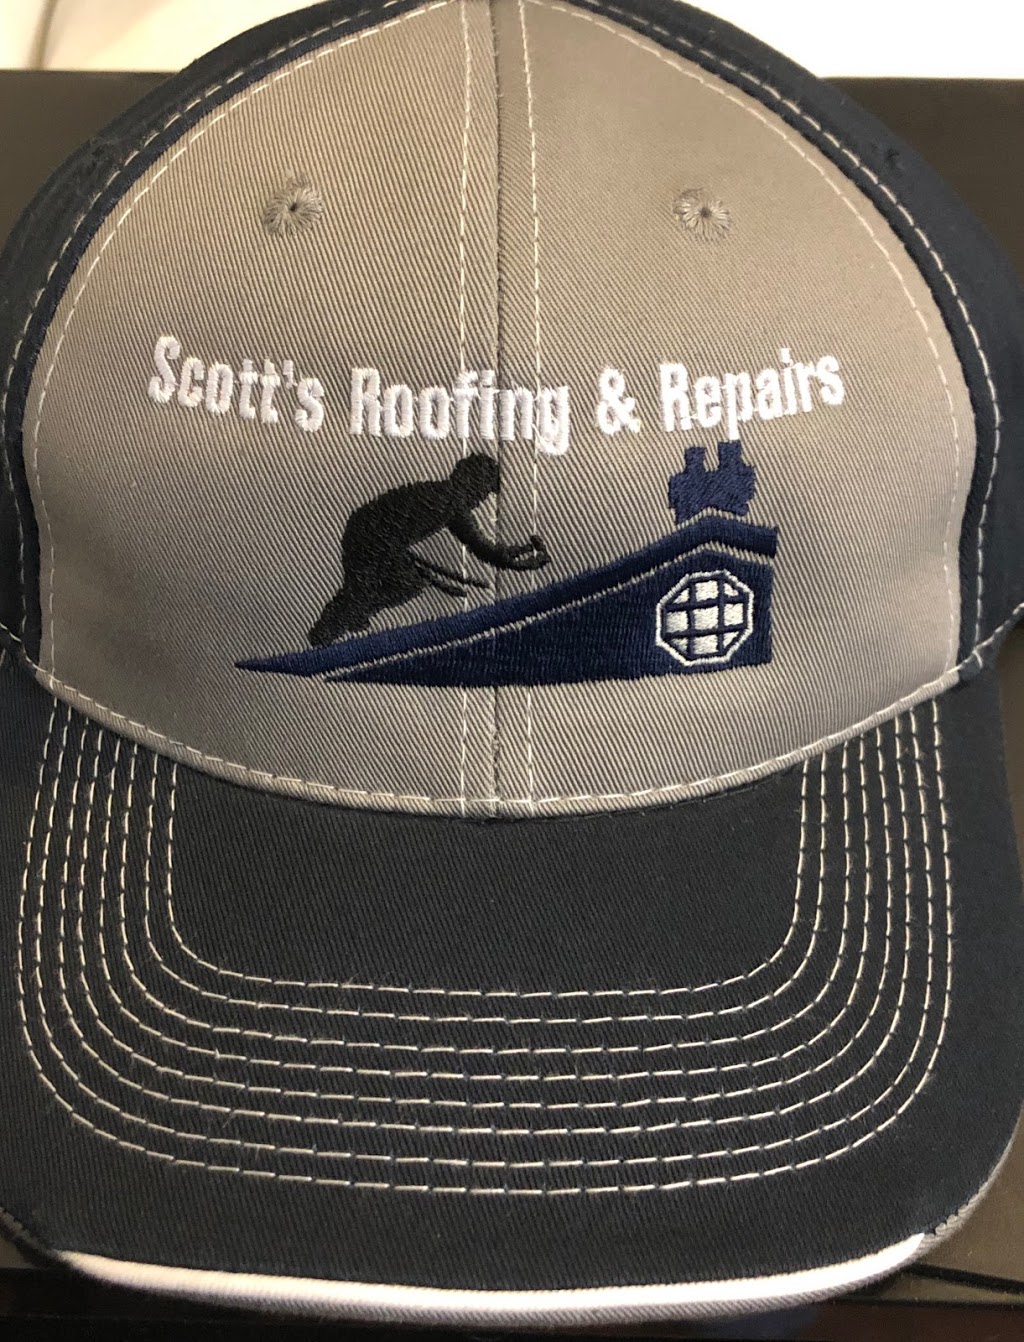 Scotts Roofing & Repairs | 72 West Street N, Thorold, ON L2V 2S5, Canada | Phone: (905) 351-4014